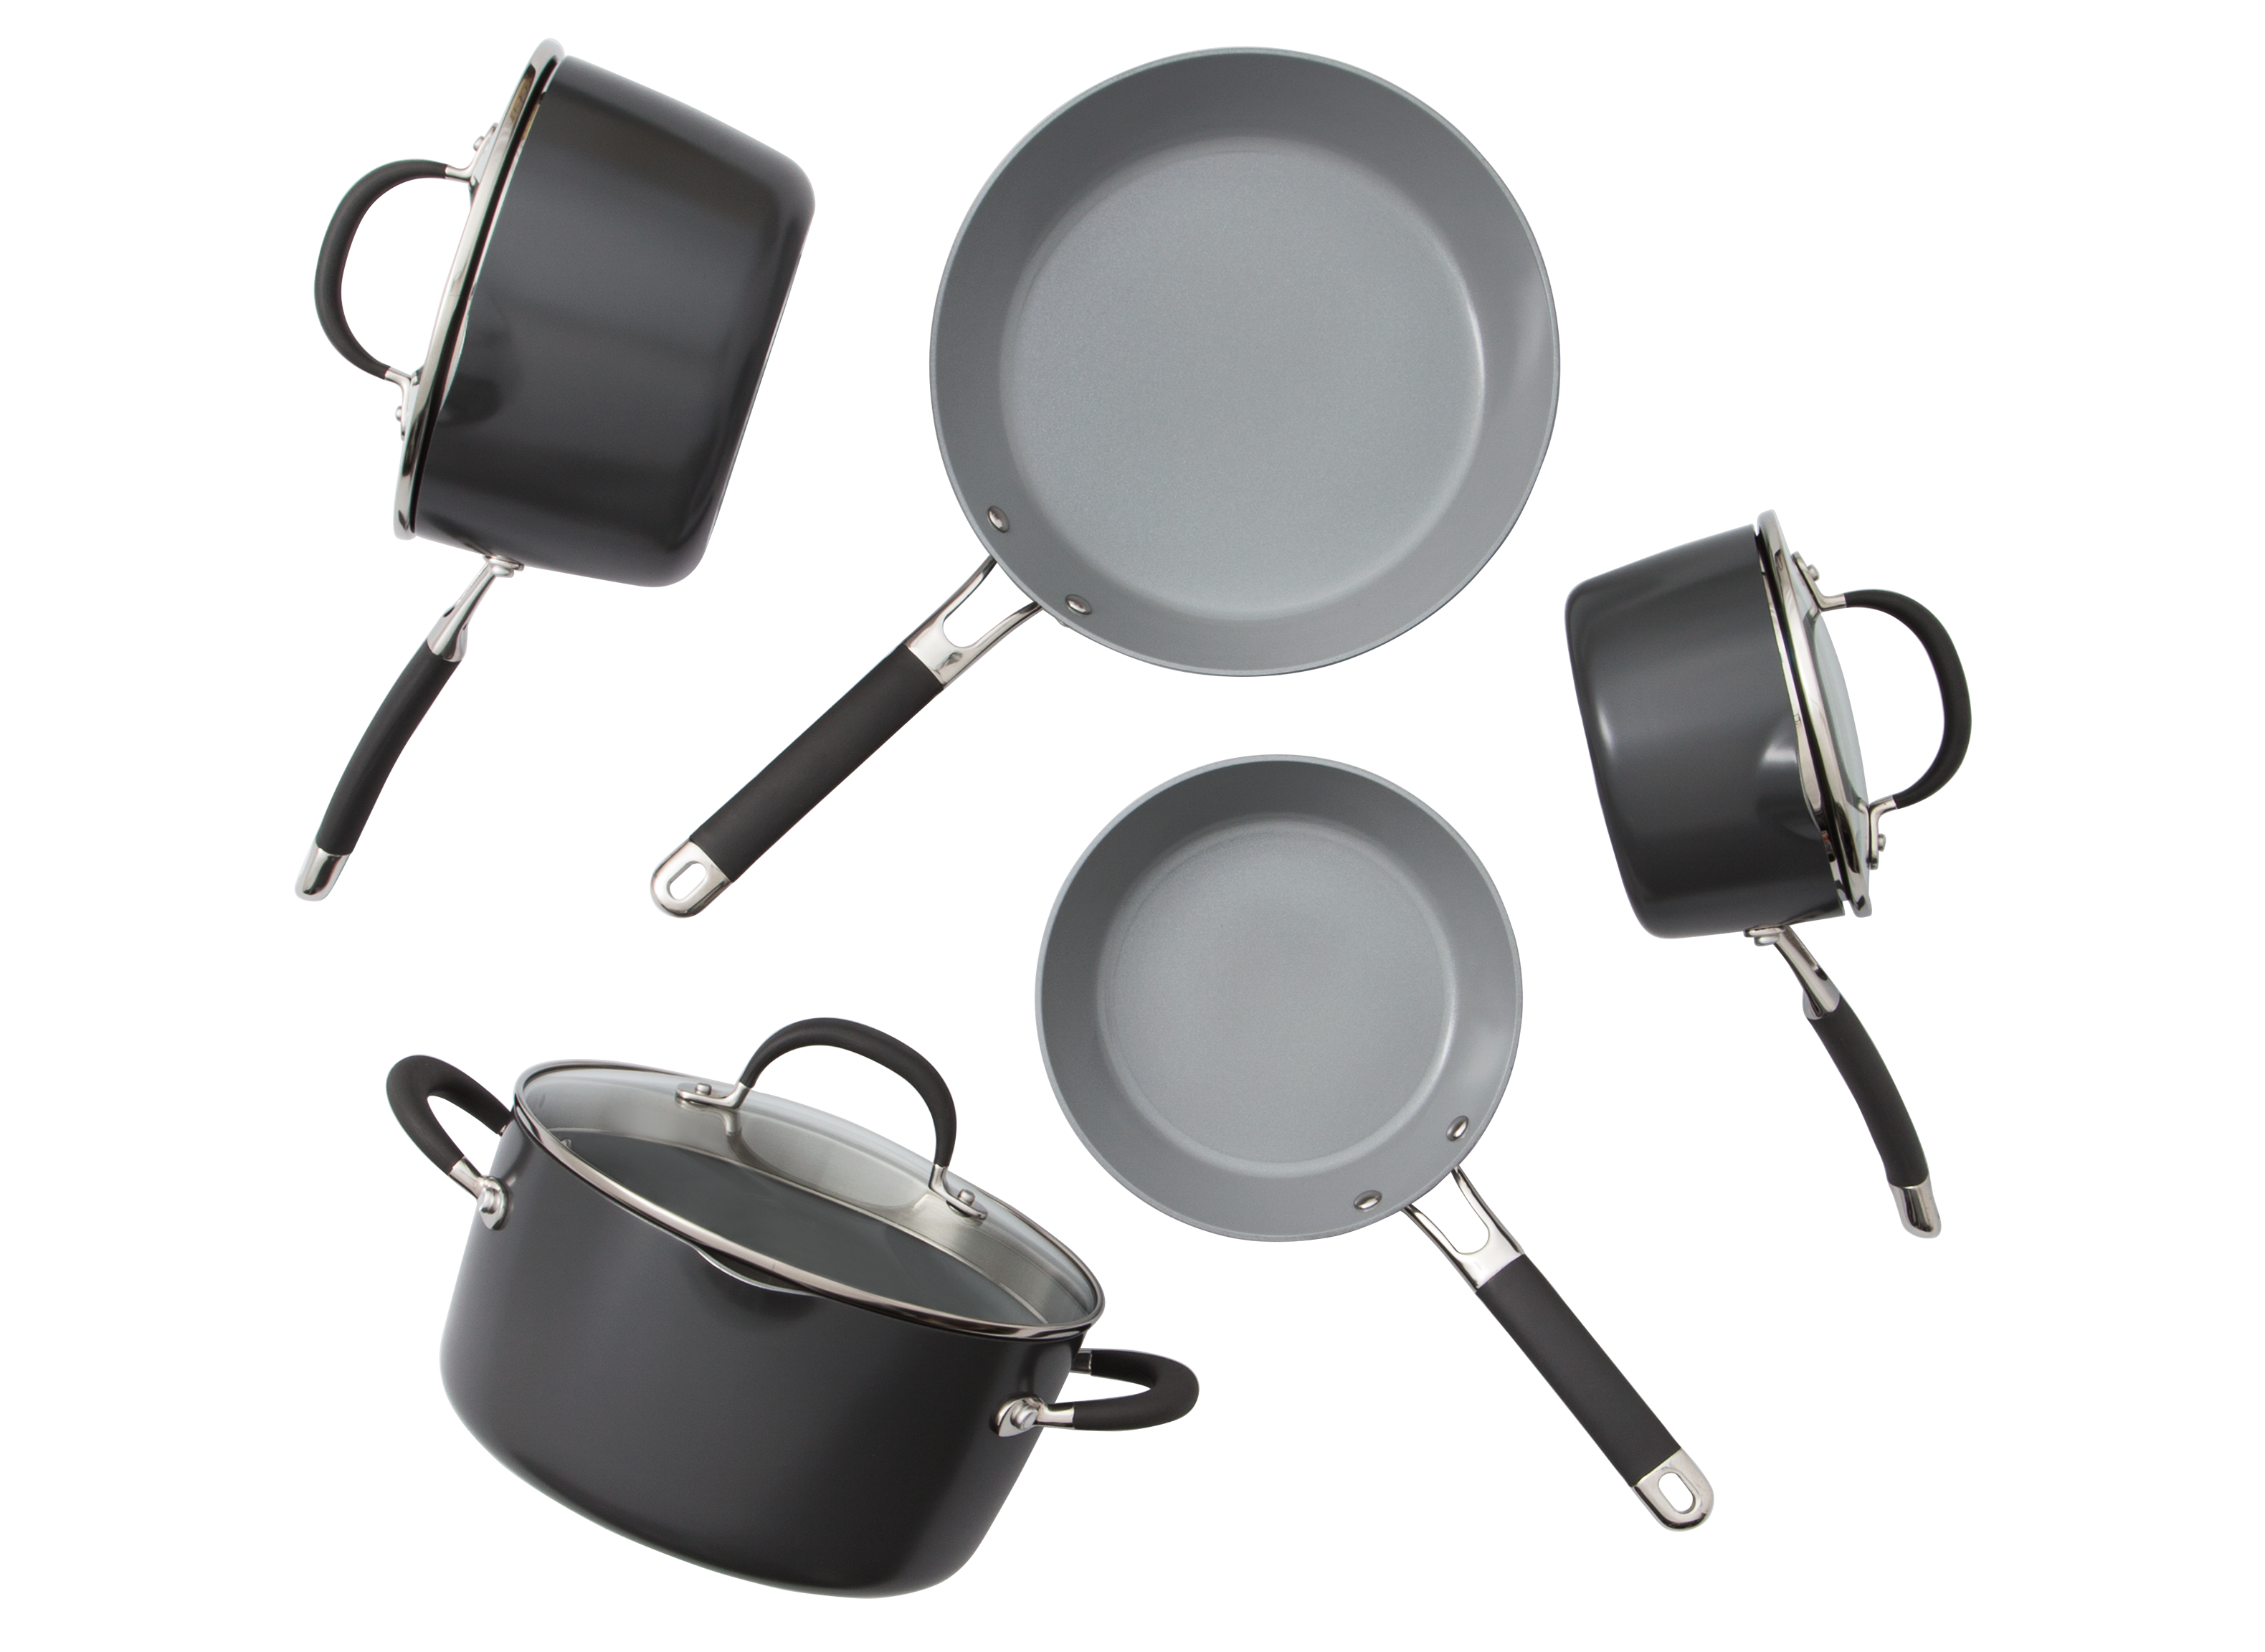 https://crdms.images.consumerreports.org/prod/products/cr/models/402091-cookware-sets-nonstick-made-by-design-target-ceramic-coated-aluminum-10015644.png